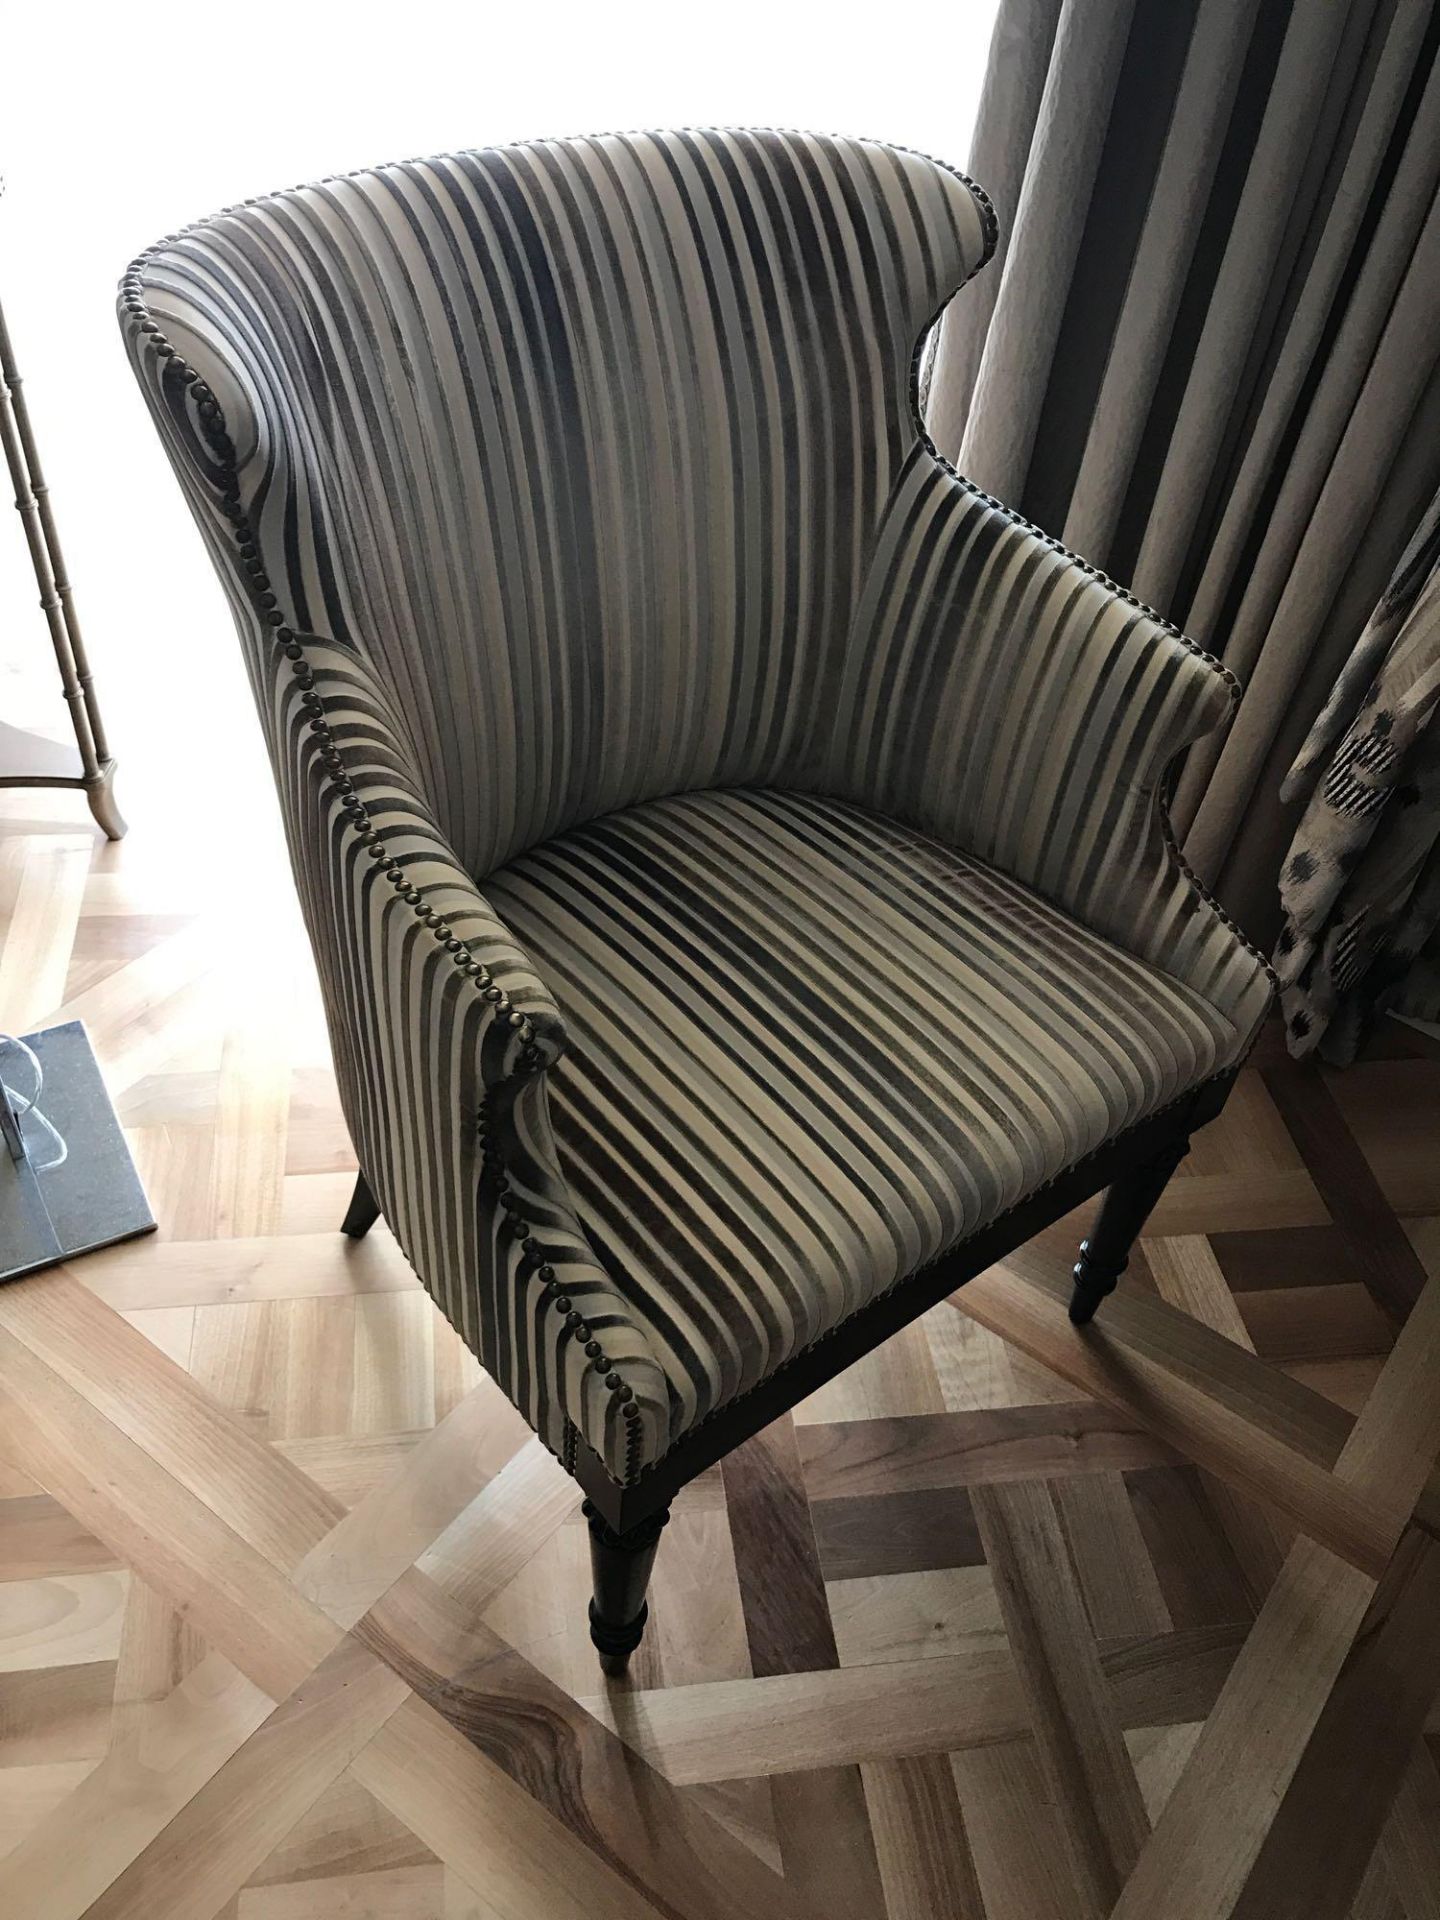 Accent Chair In Upholstered Striped Fabric 65 x 49 x 84cm Room 604